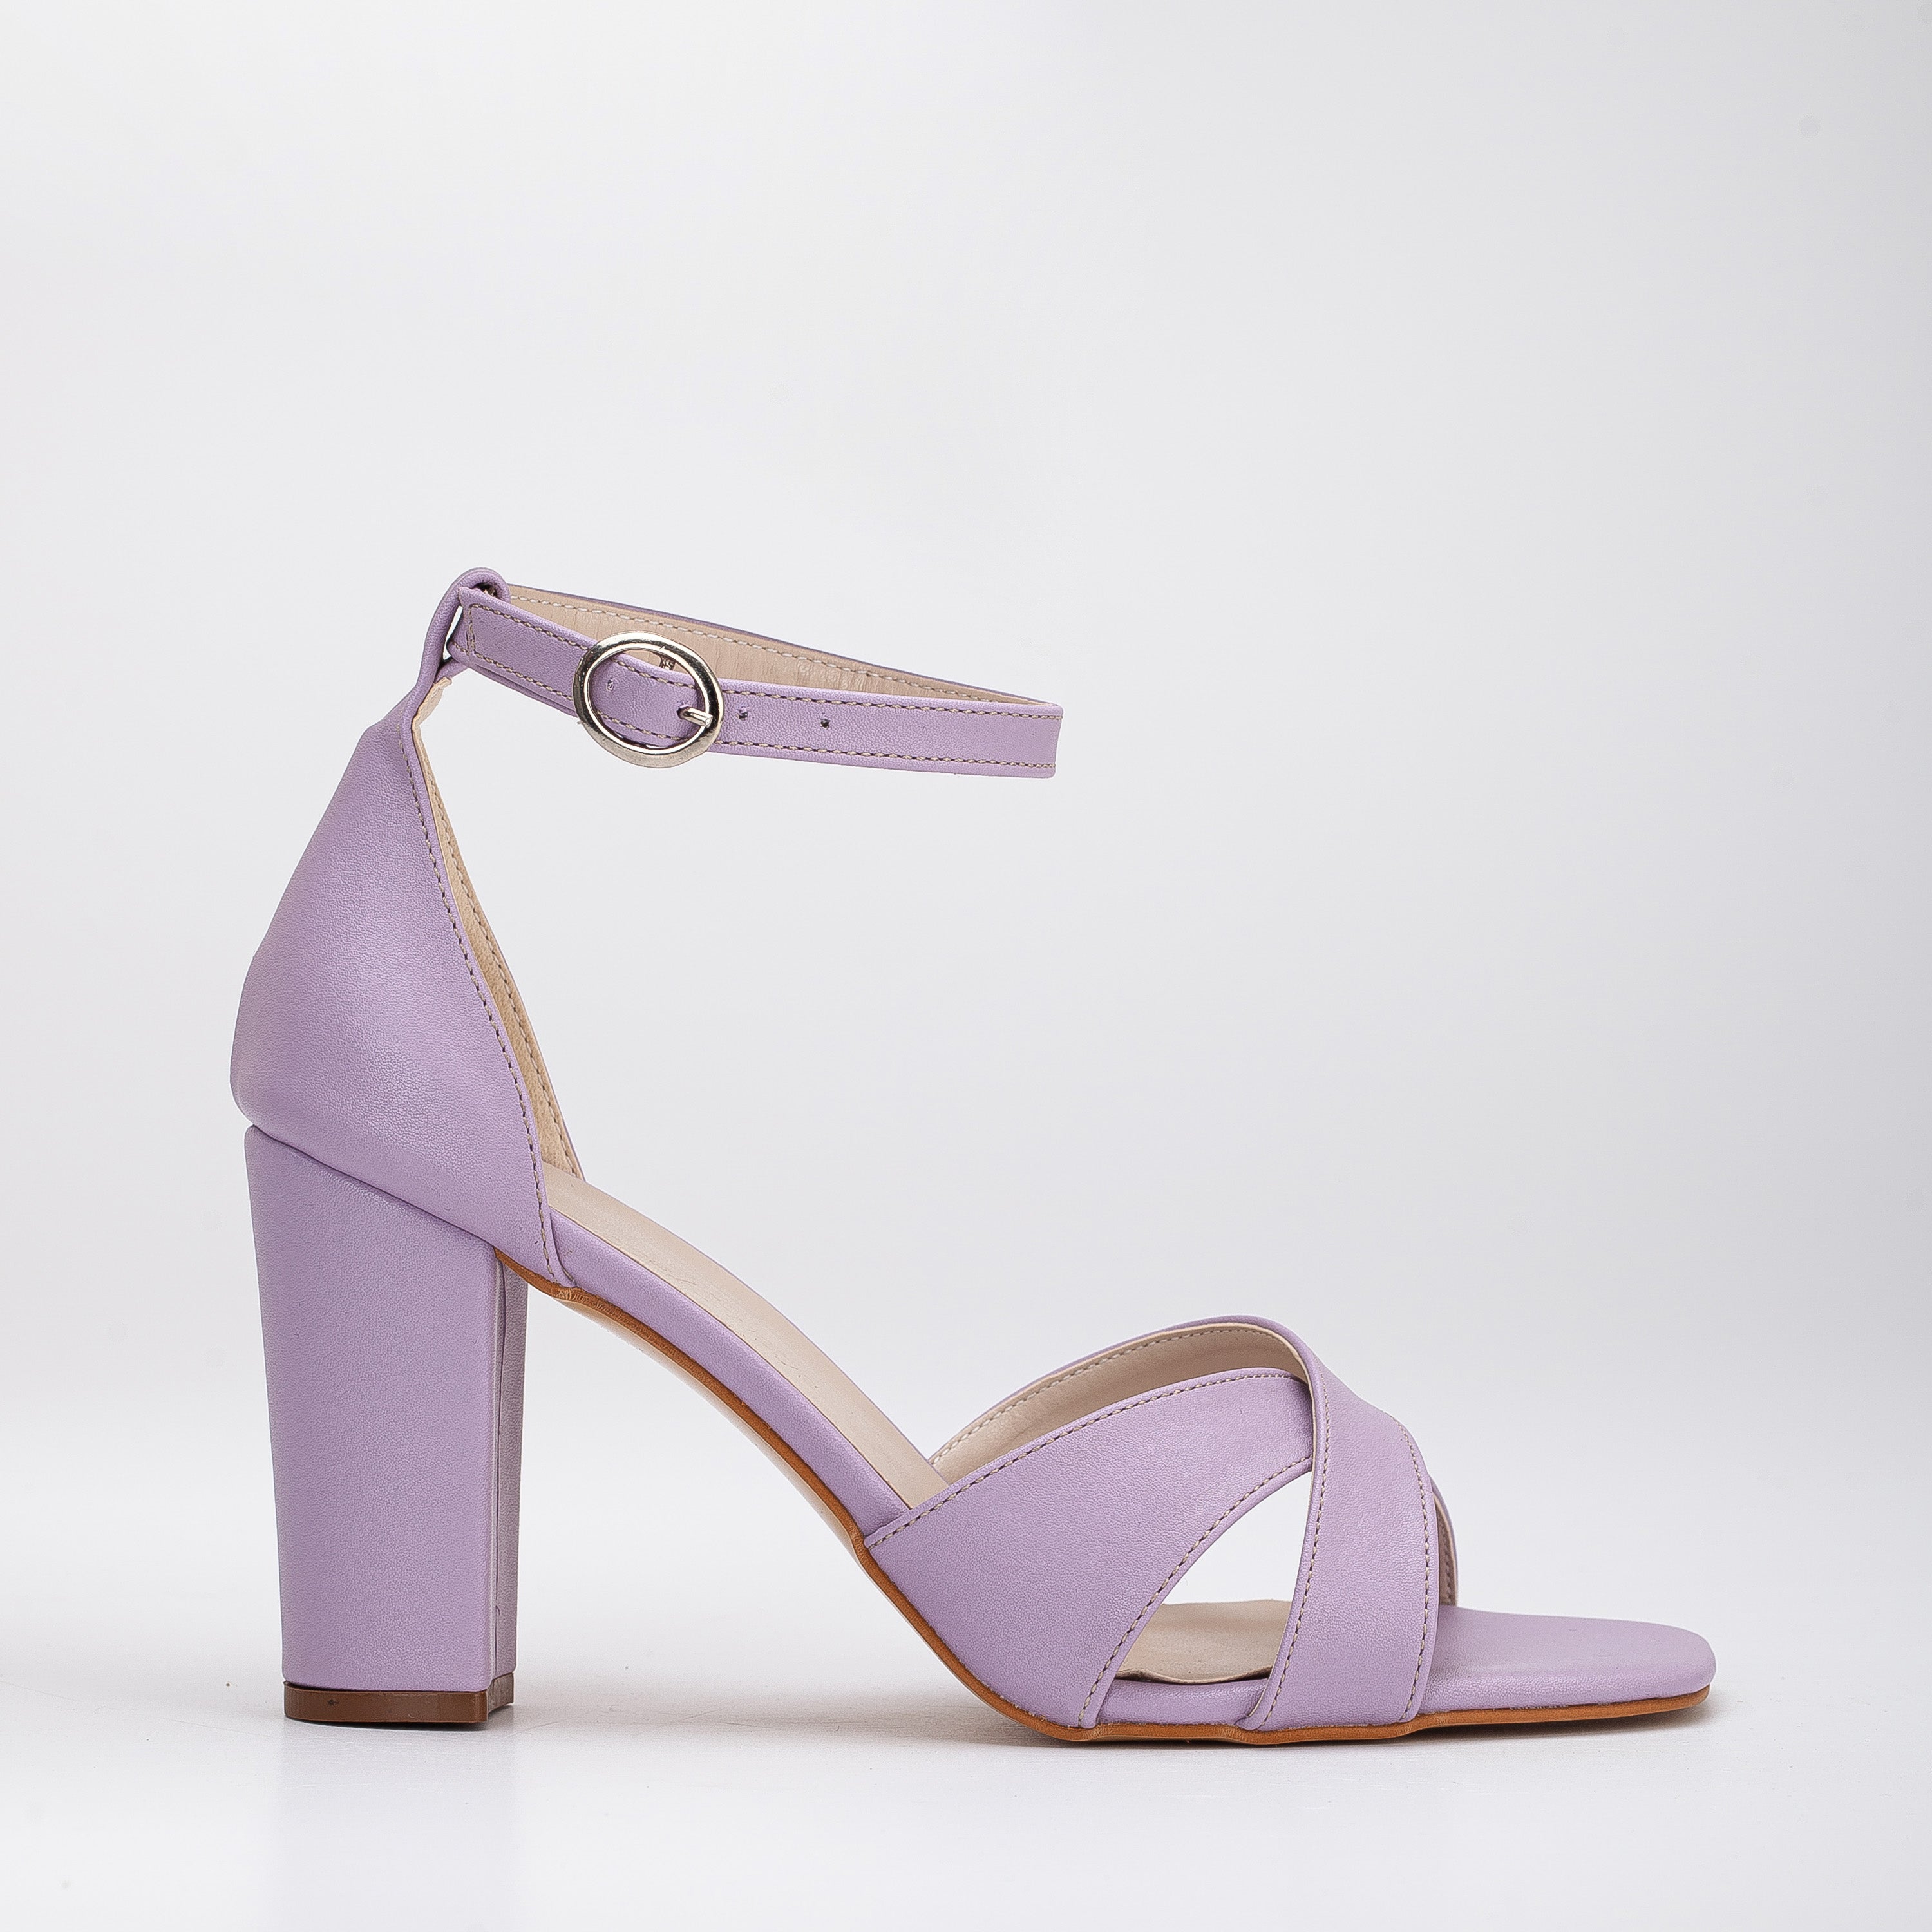 Blissful Purple Flat Sandals For Spring !Stylish Board | Purple shoes,  Purple flats, Purple sandals